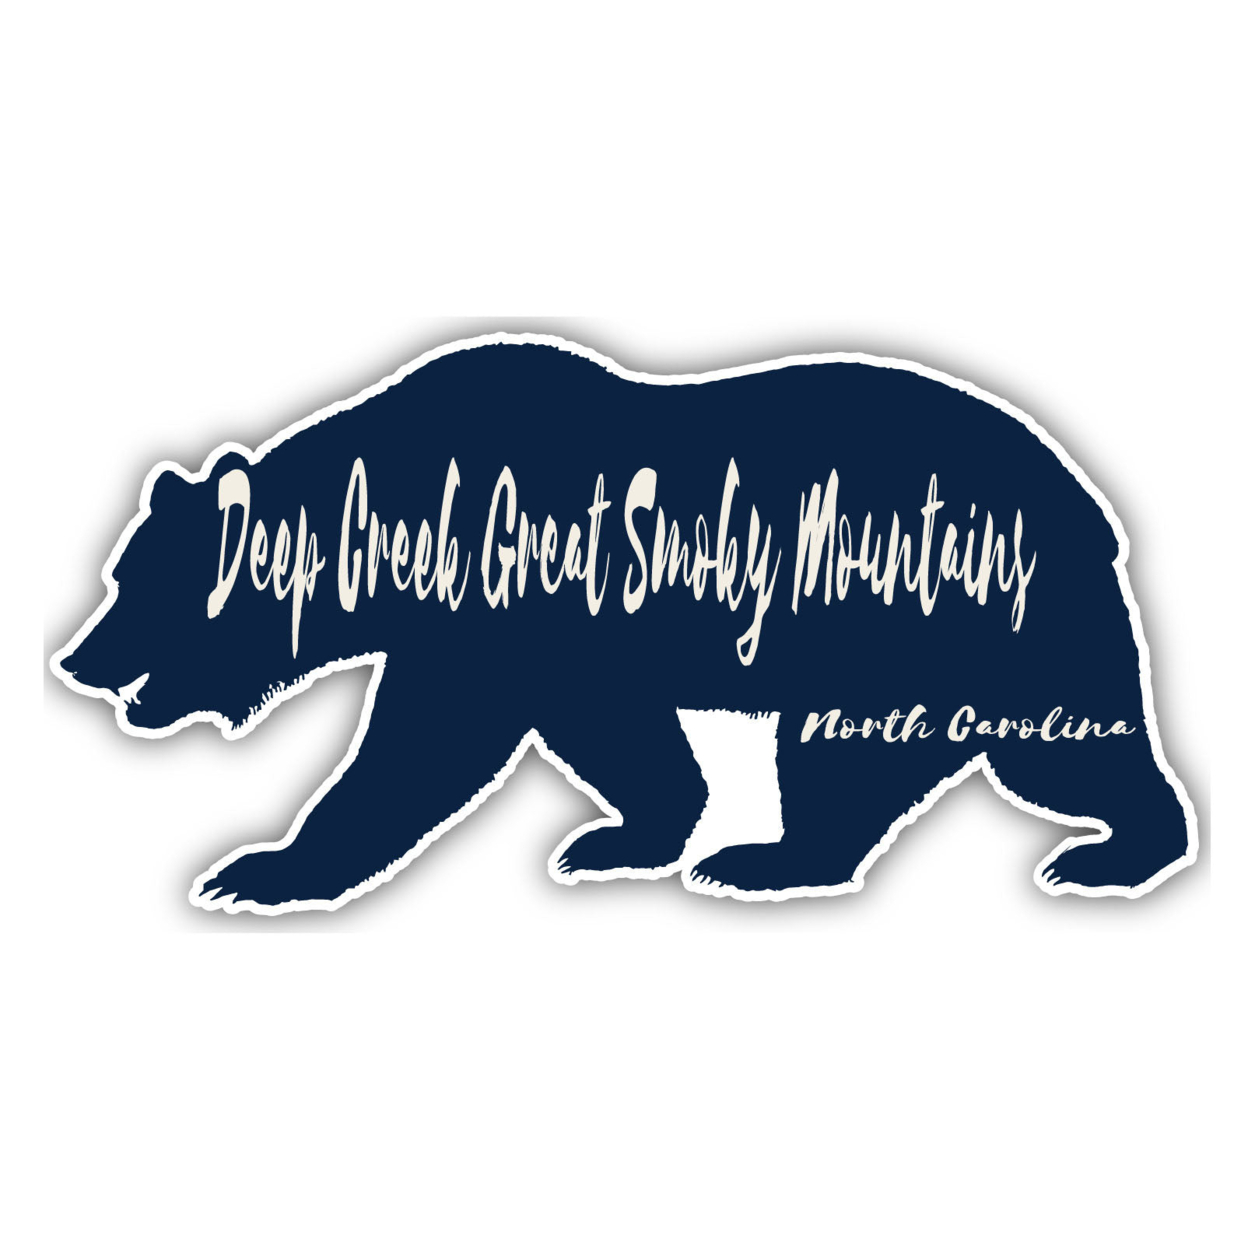 Deep Creek Great Smoky Mountains North Carolina Souvenir Decorative Stickers (Choose Theme And Size) - 4-Pack, 2-Inch, Bear